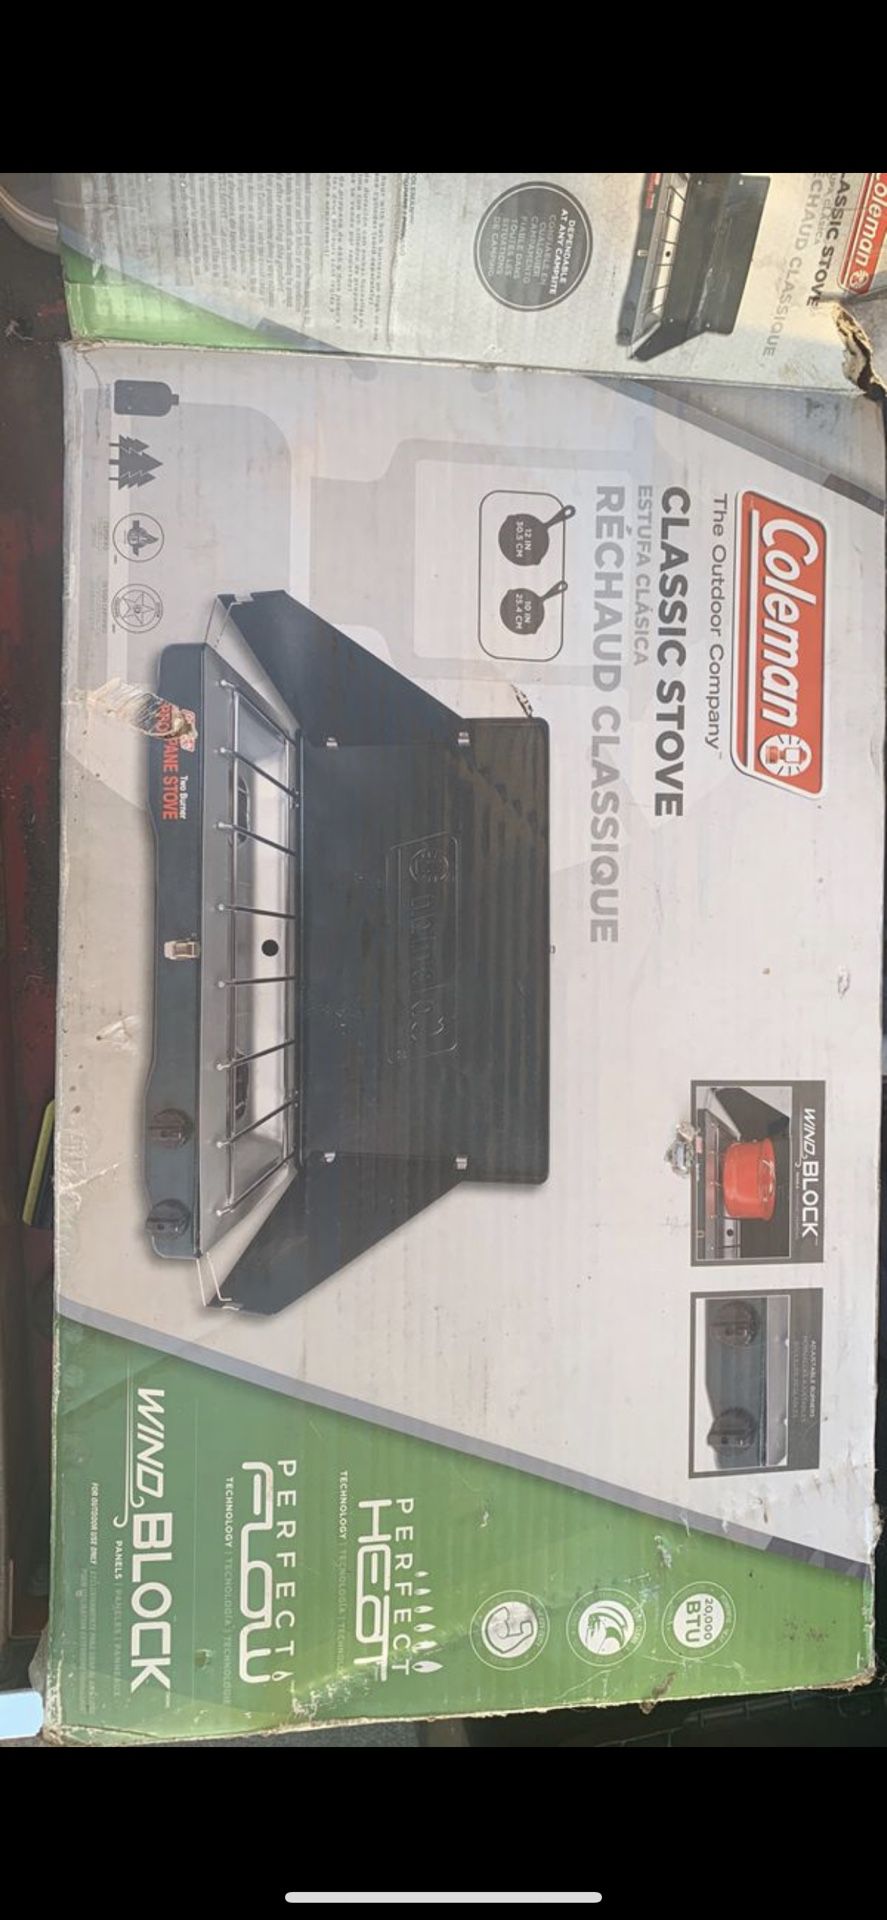 Coleman Portable Propane Gas Classic Stove with 2 Burners